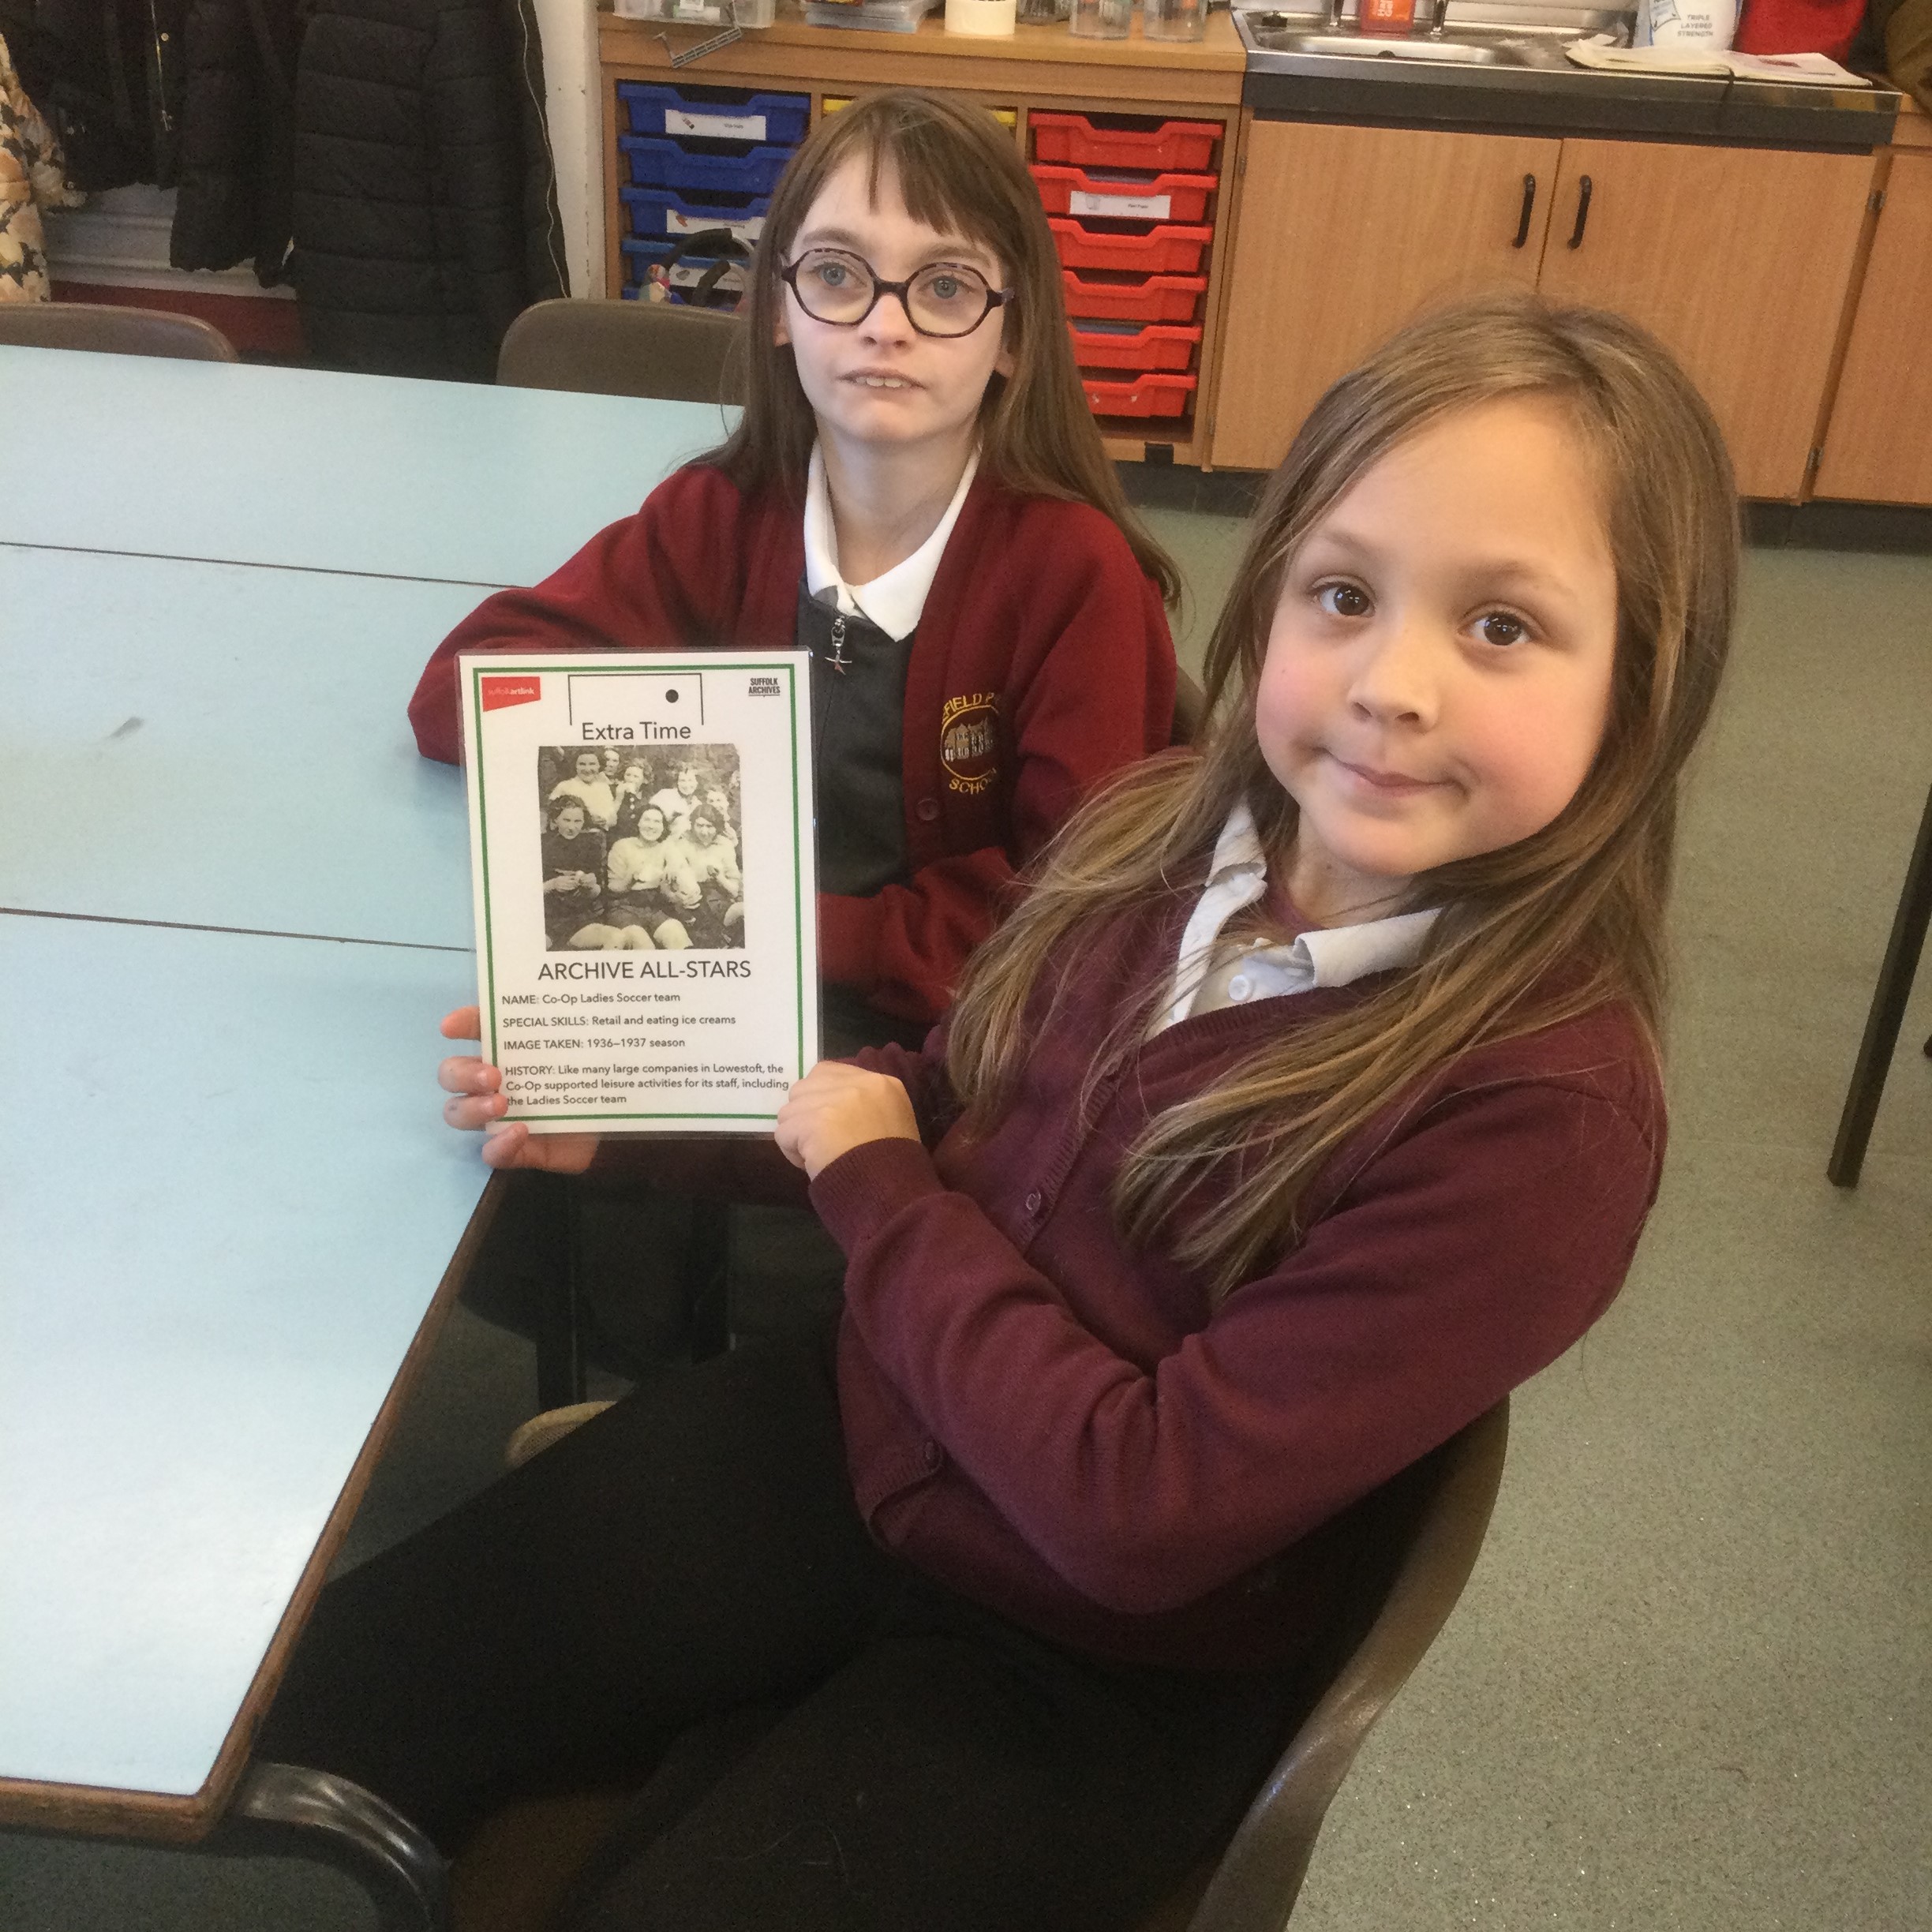 Two school girls seated at a blue table, holding up a plasticised card with a picture of a ladies football team on it